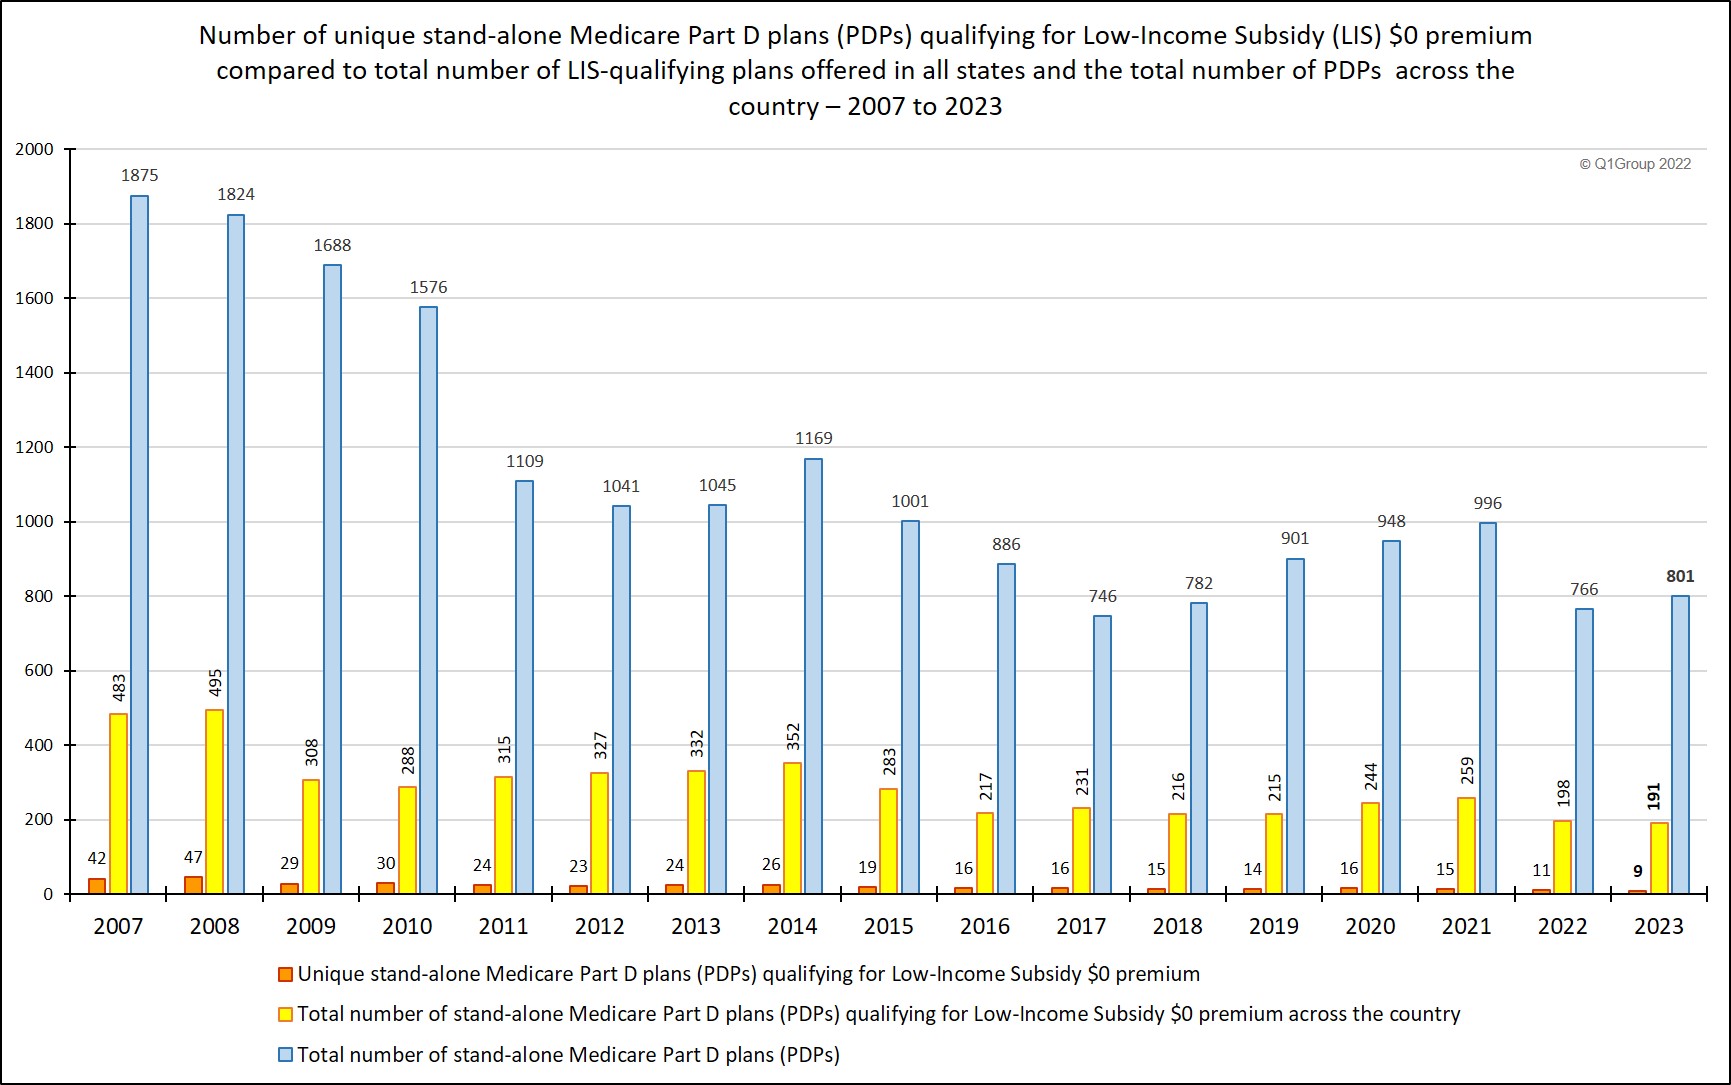 Total LIS qualifying PDPs compared to total PDPs